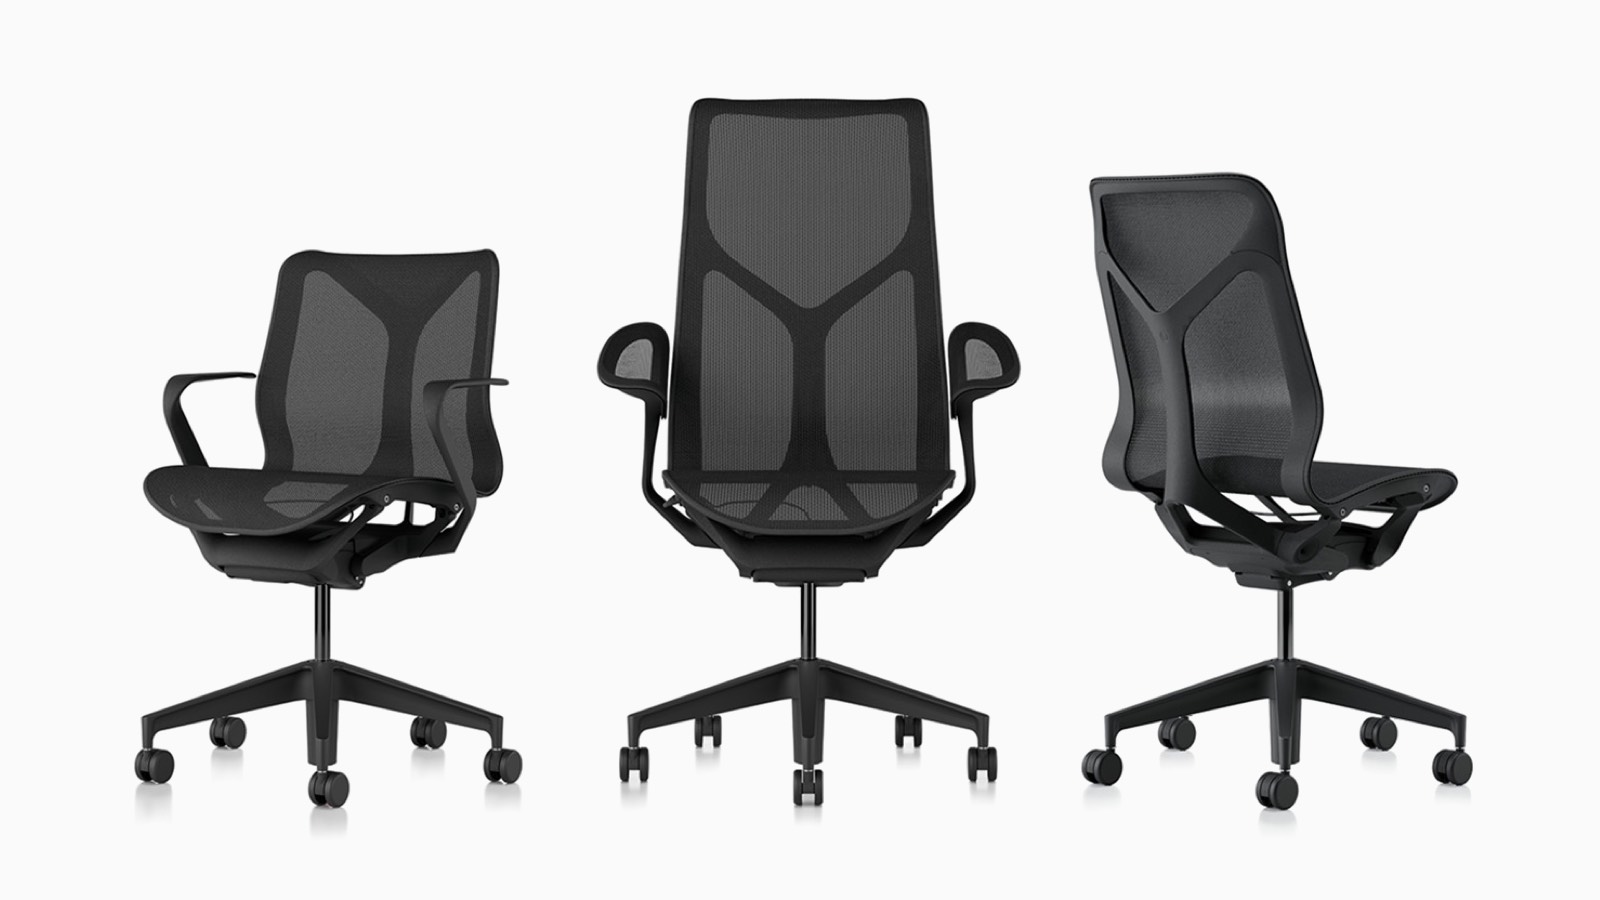 Low-back, high-back, and mid-back Cosm ergonomic desk chairs with suspension materials, bases, and frames in Graphite dark grey.